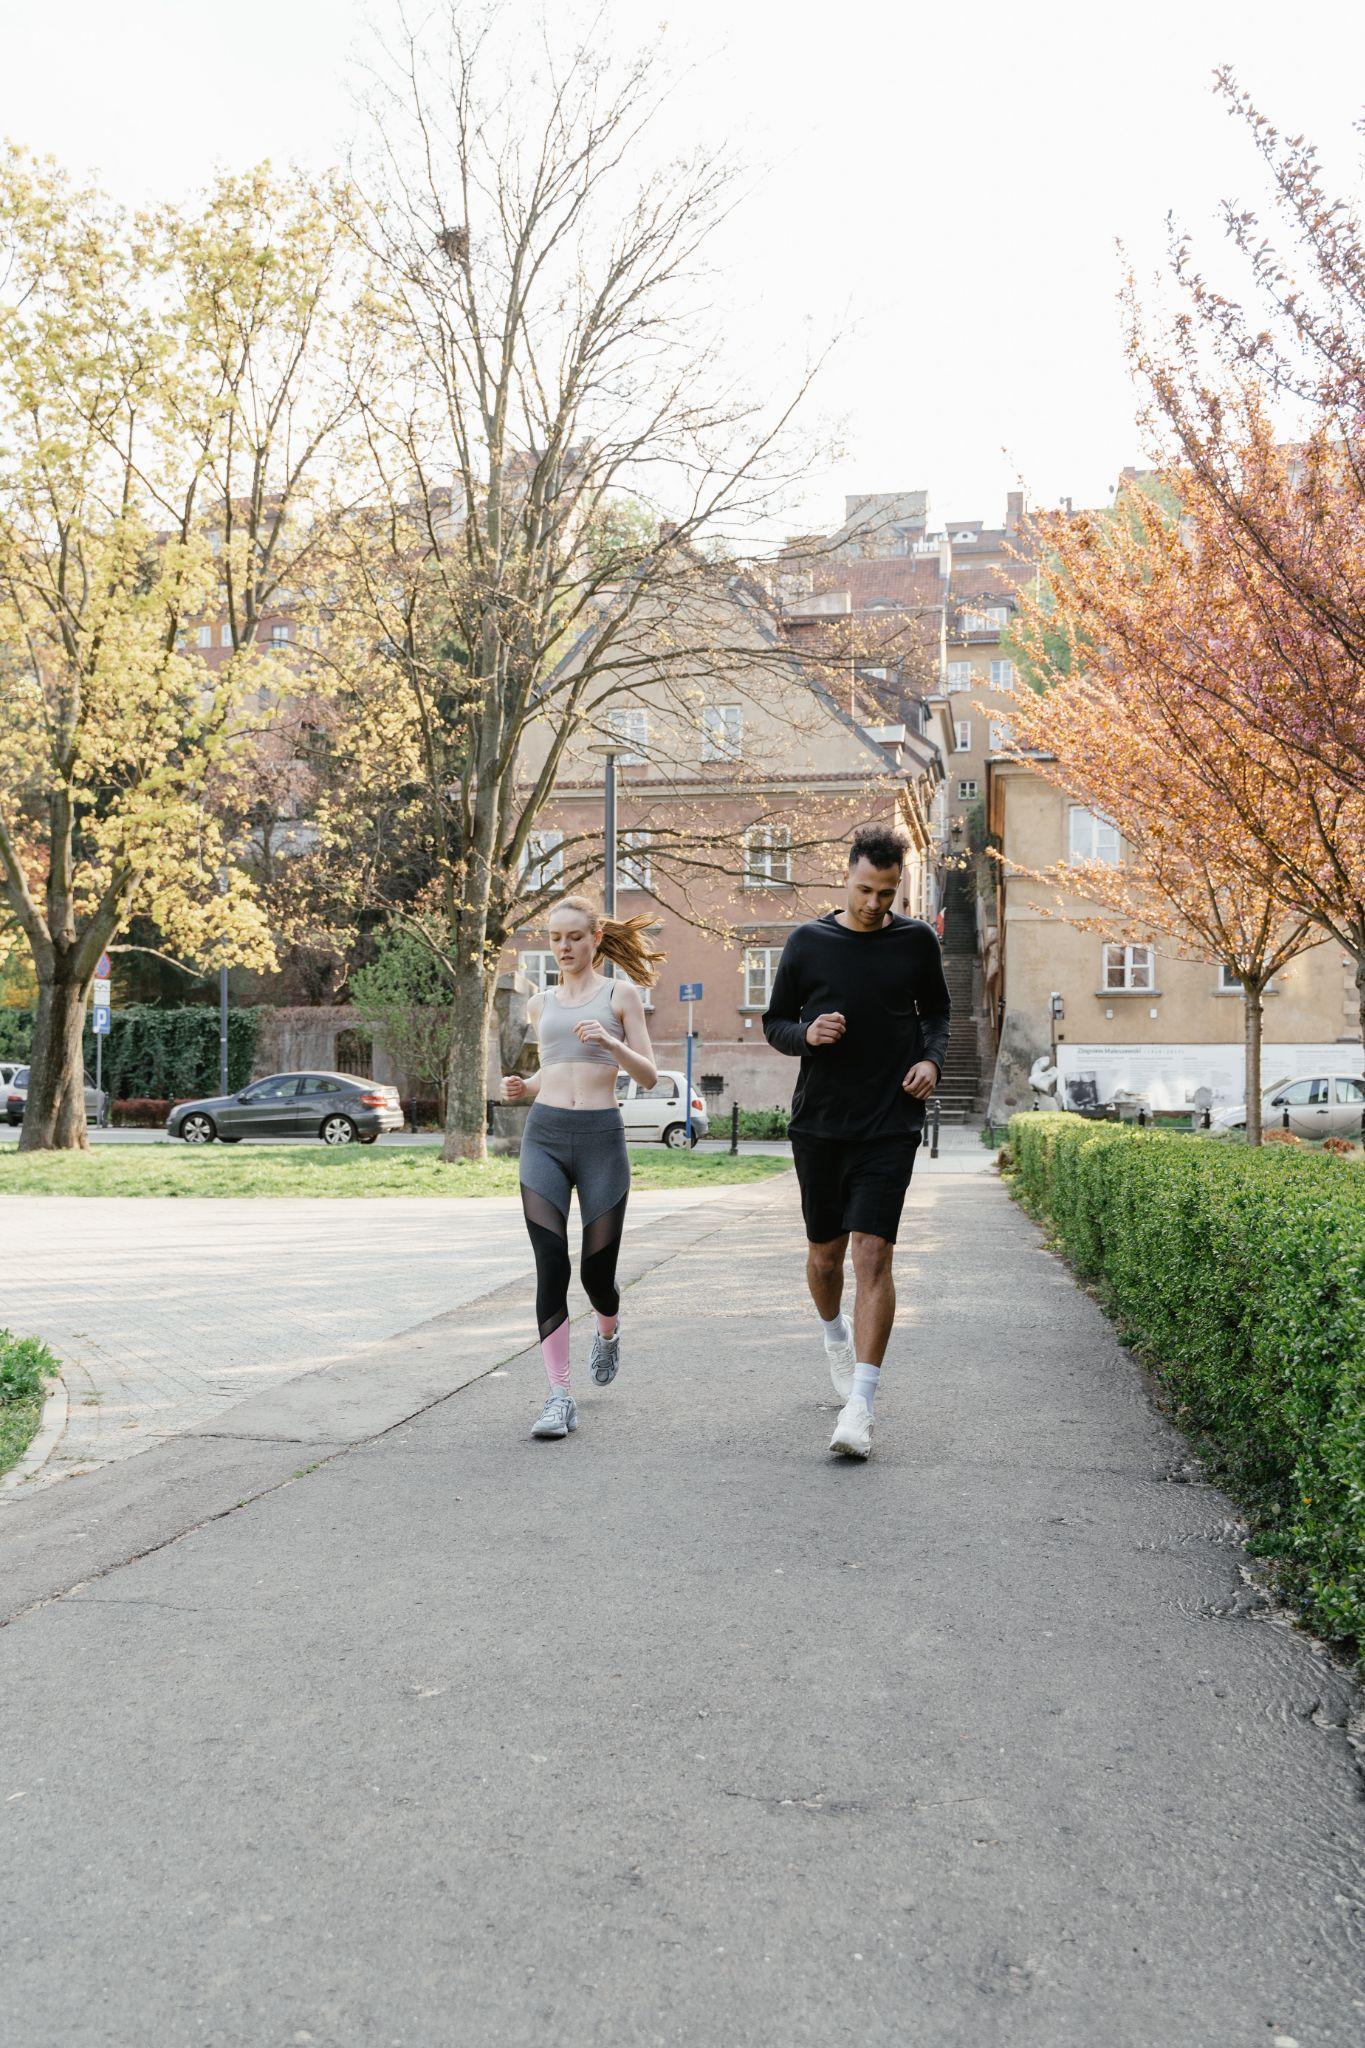 Photo of women and men running together